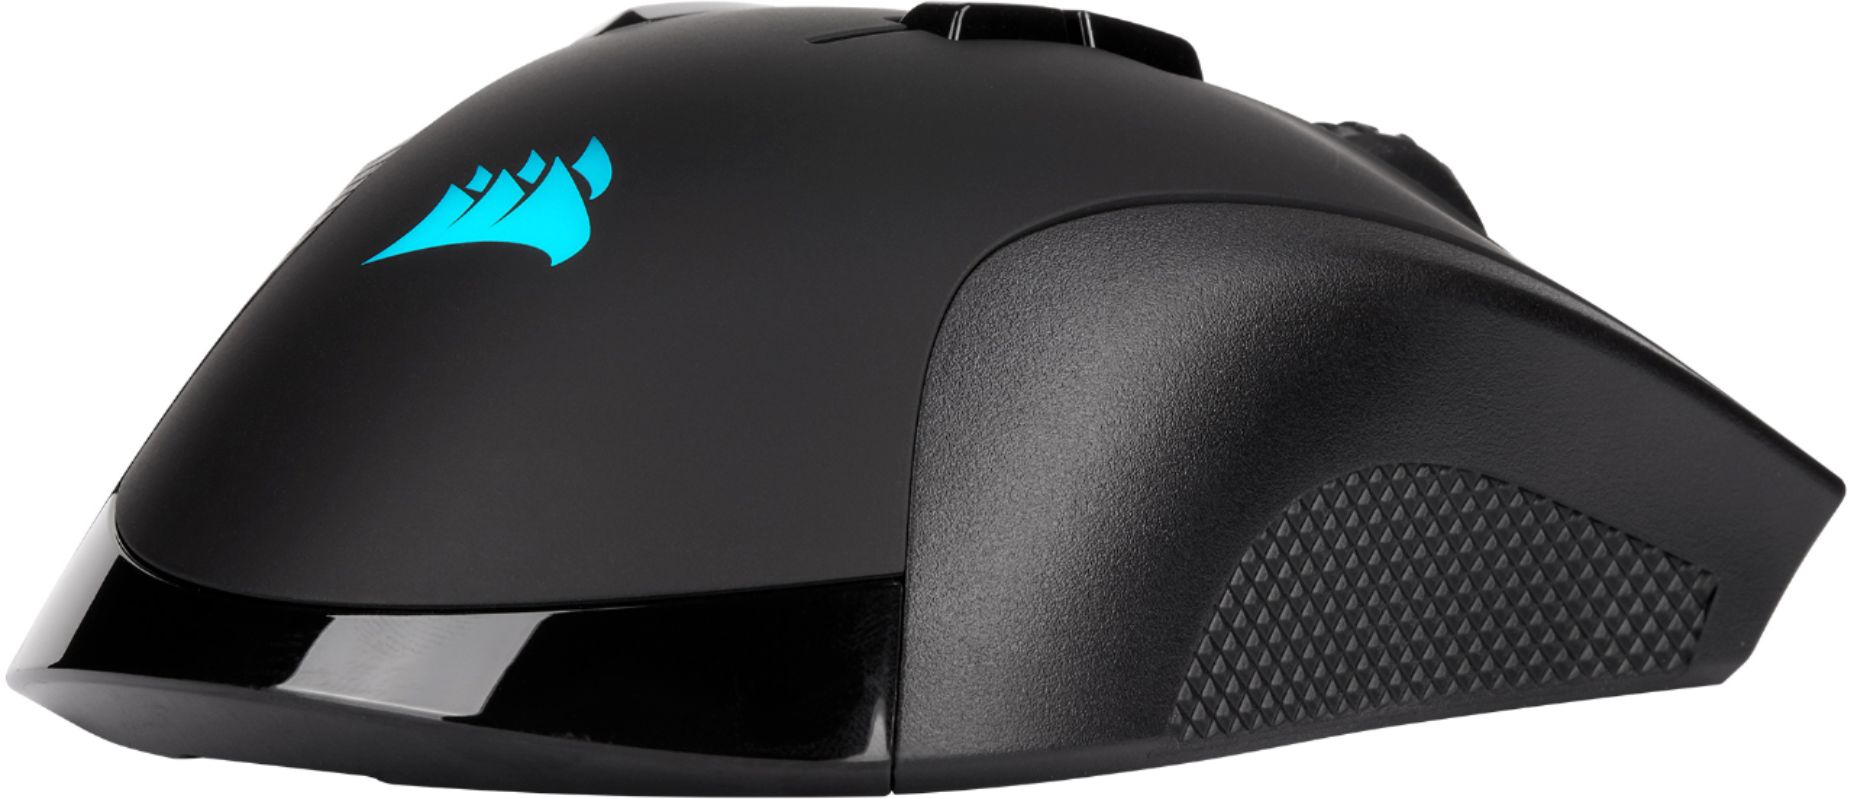 IRONCLAW RGB Gaming Mouse Black CH-9317011-NA Best Buy